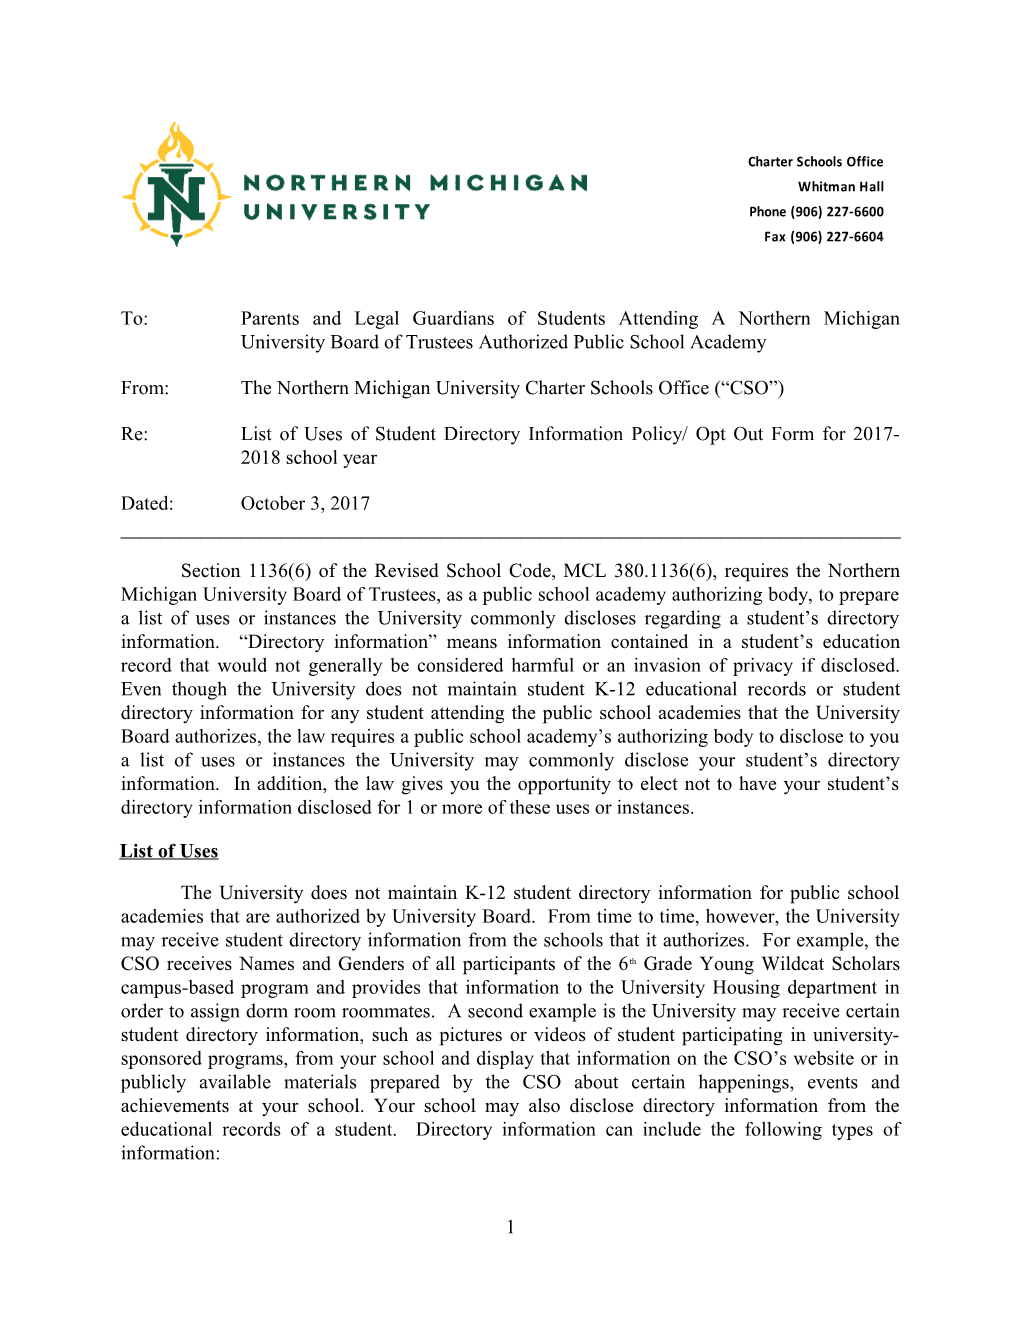 From: the Northern Michigan University Charter Schools Office ( CSO )